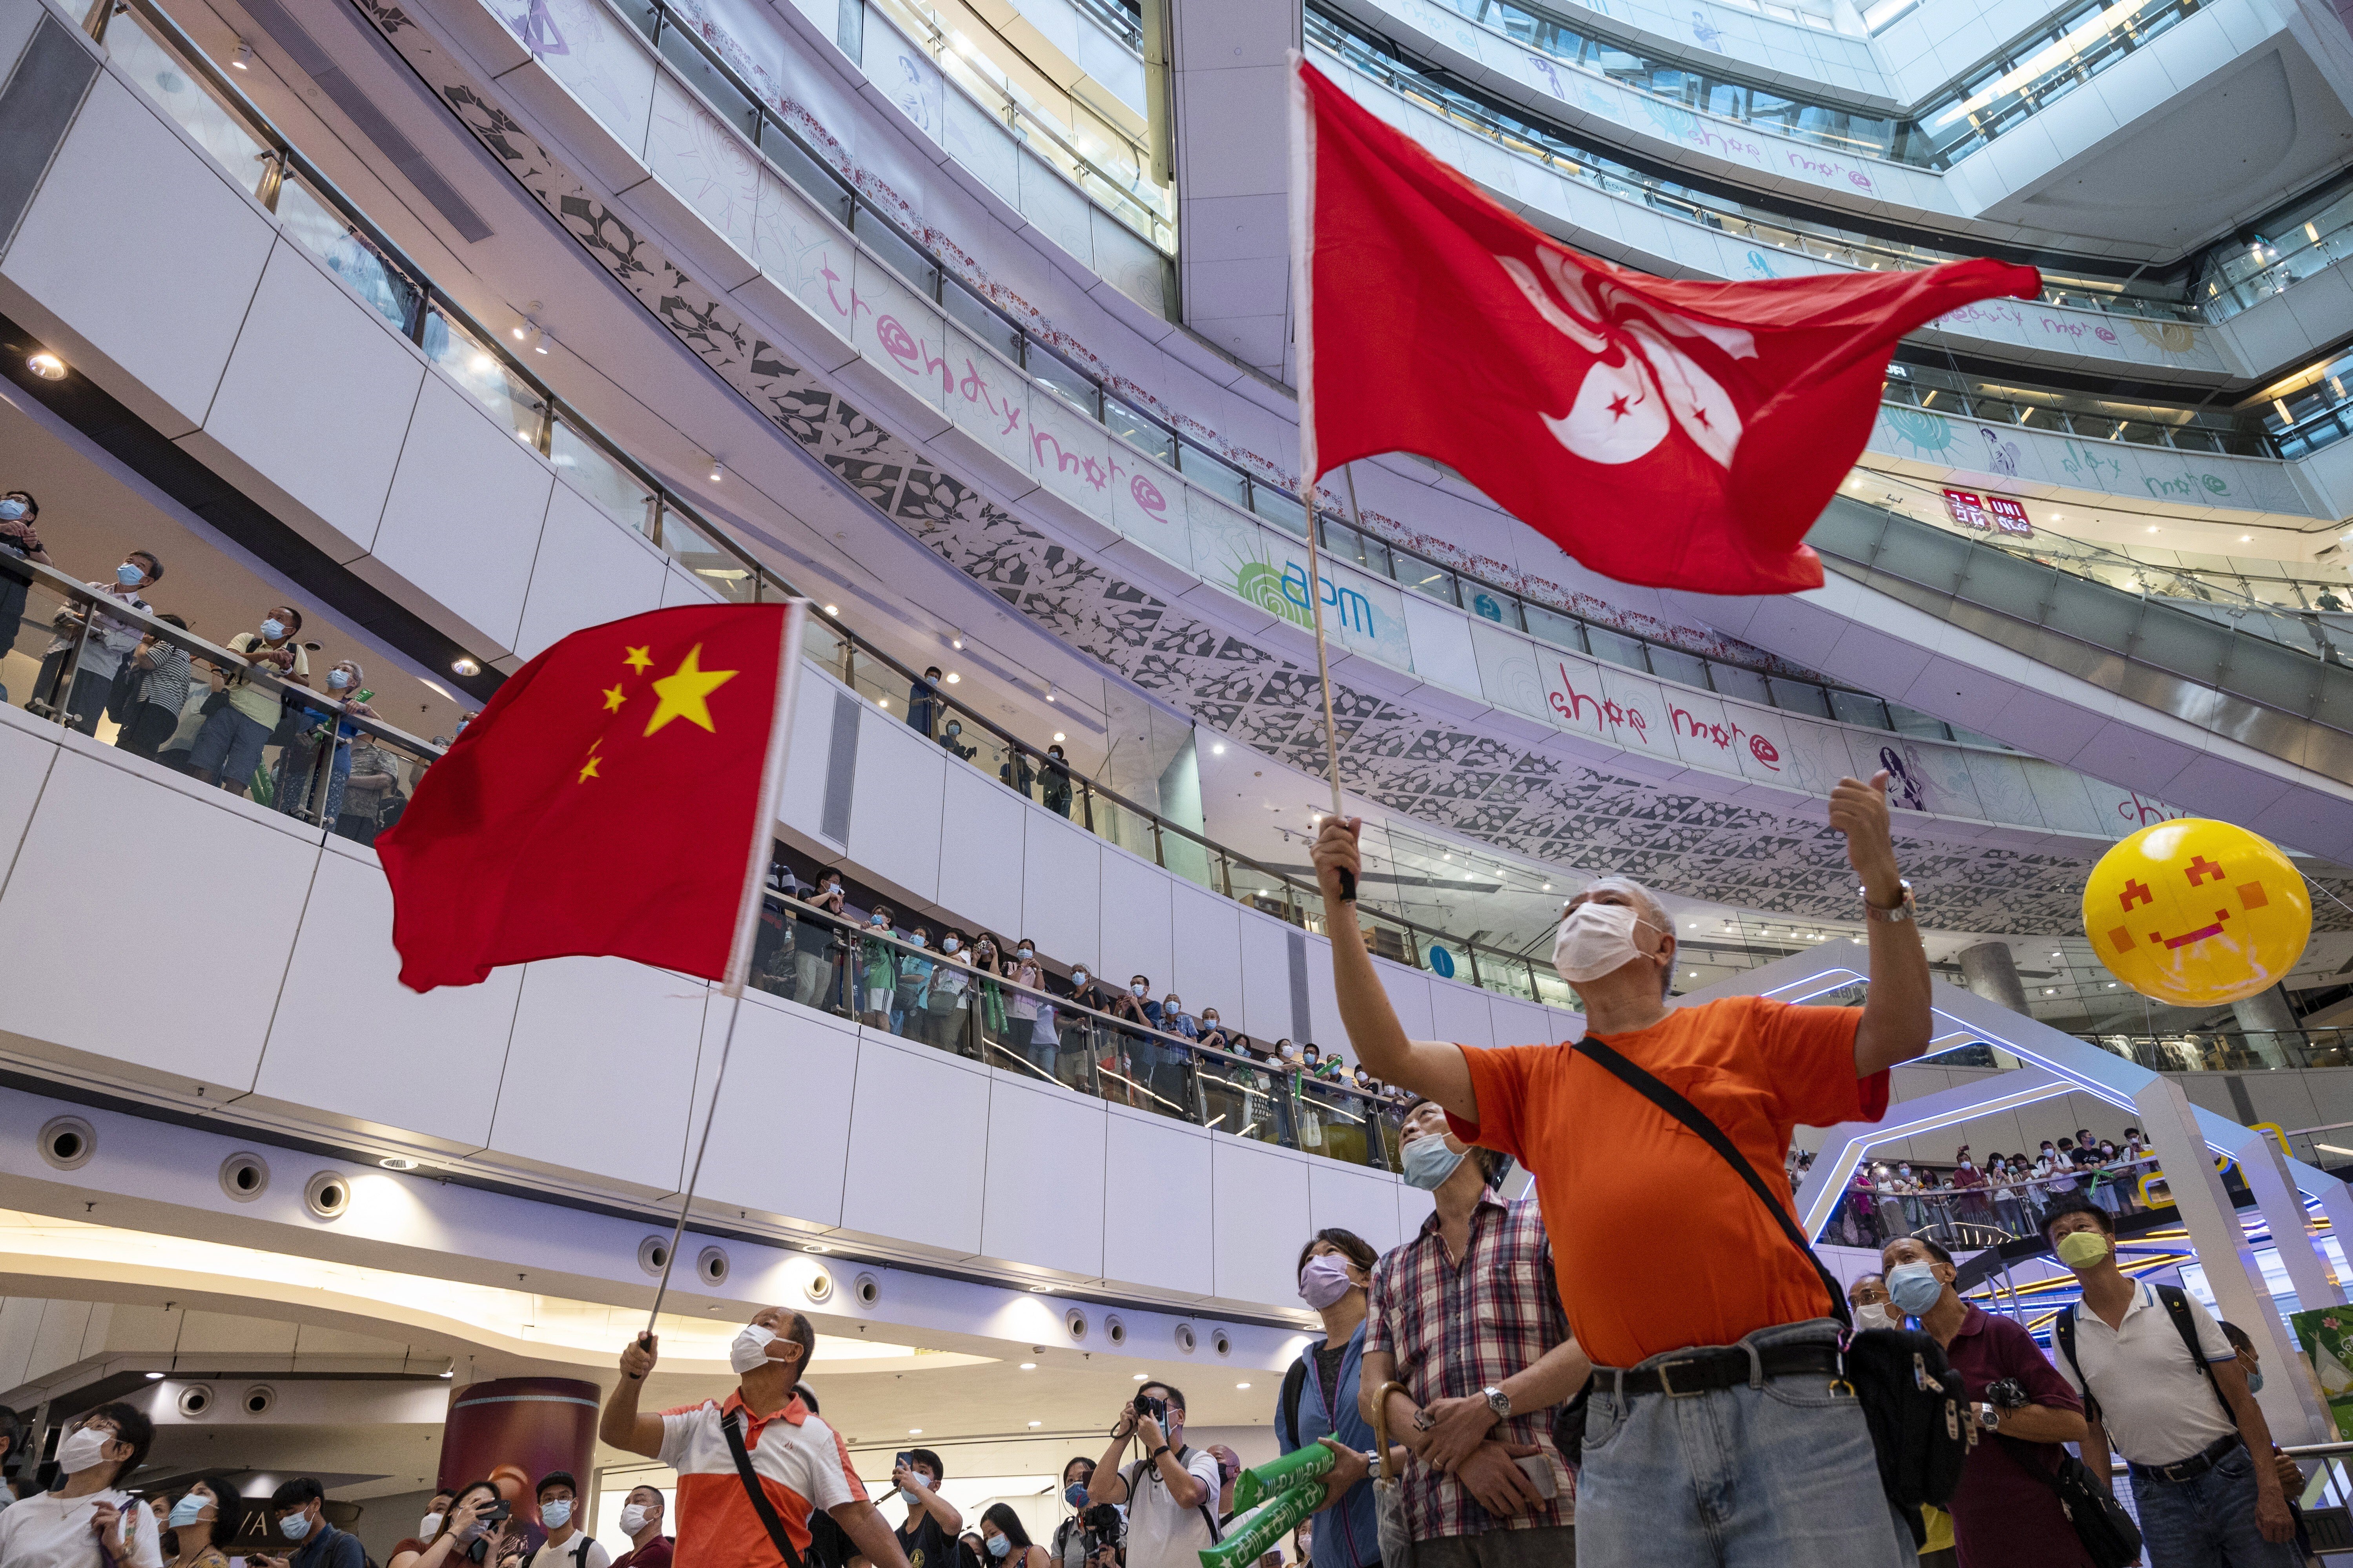 People watch a broadcast of Hong Kong swimmer Siobhan Haughey's silver medal win in the women's 100m freestyle final, in a mall, on July 30, 2021. Photo: EPA-EFE